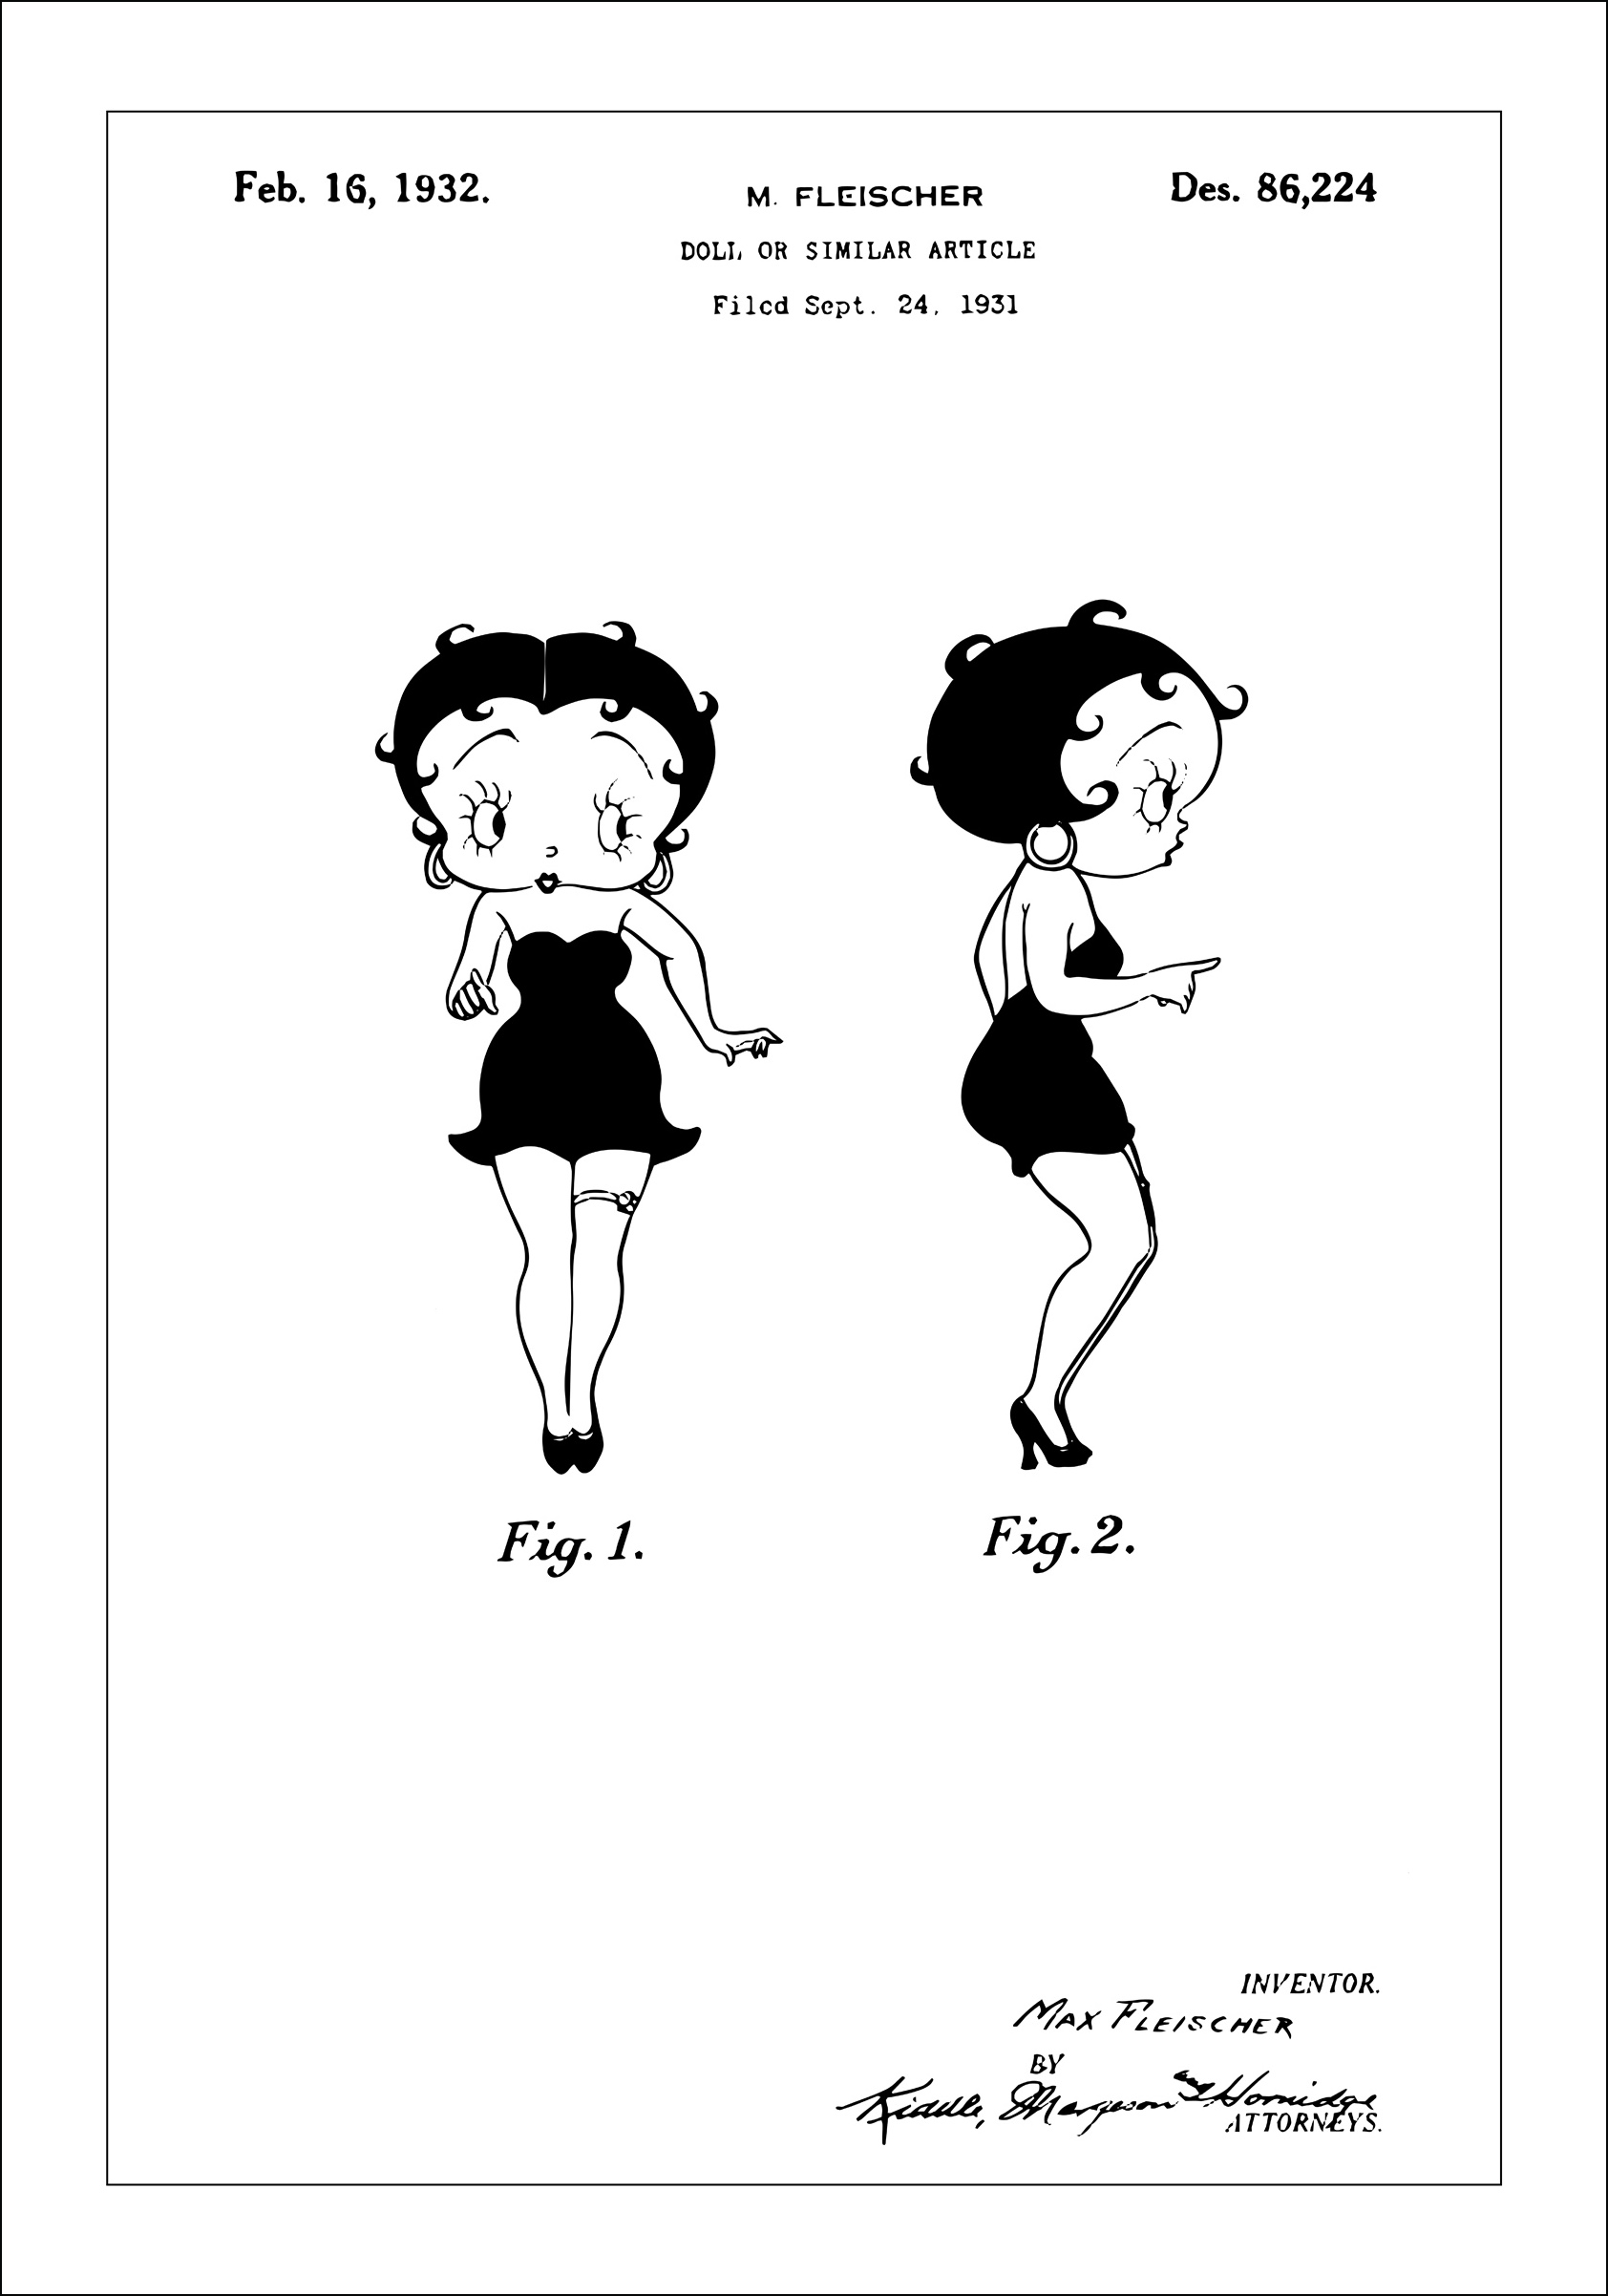 betty boop poster